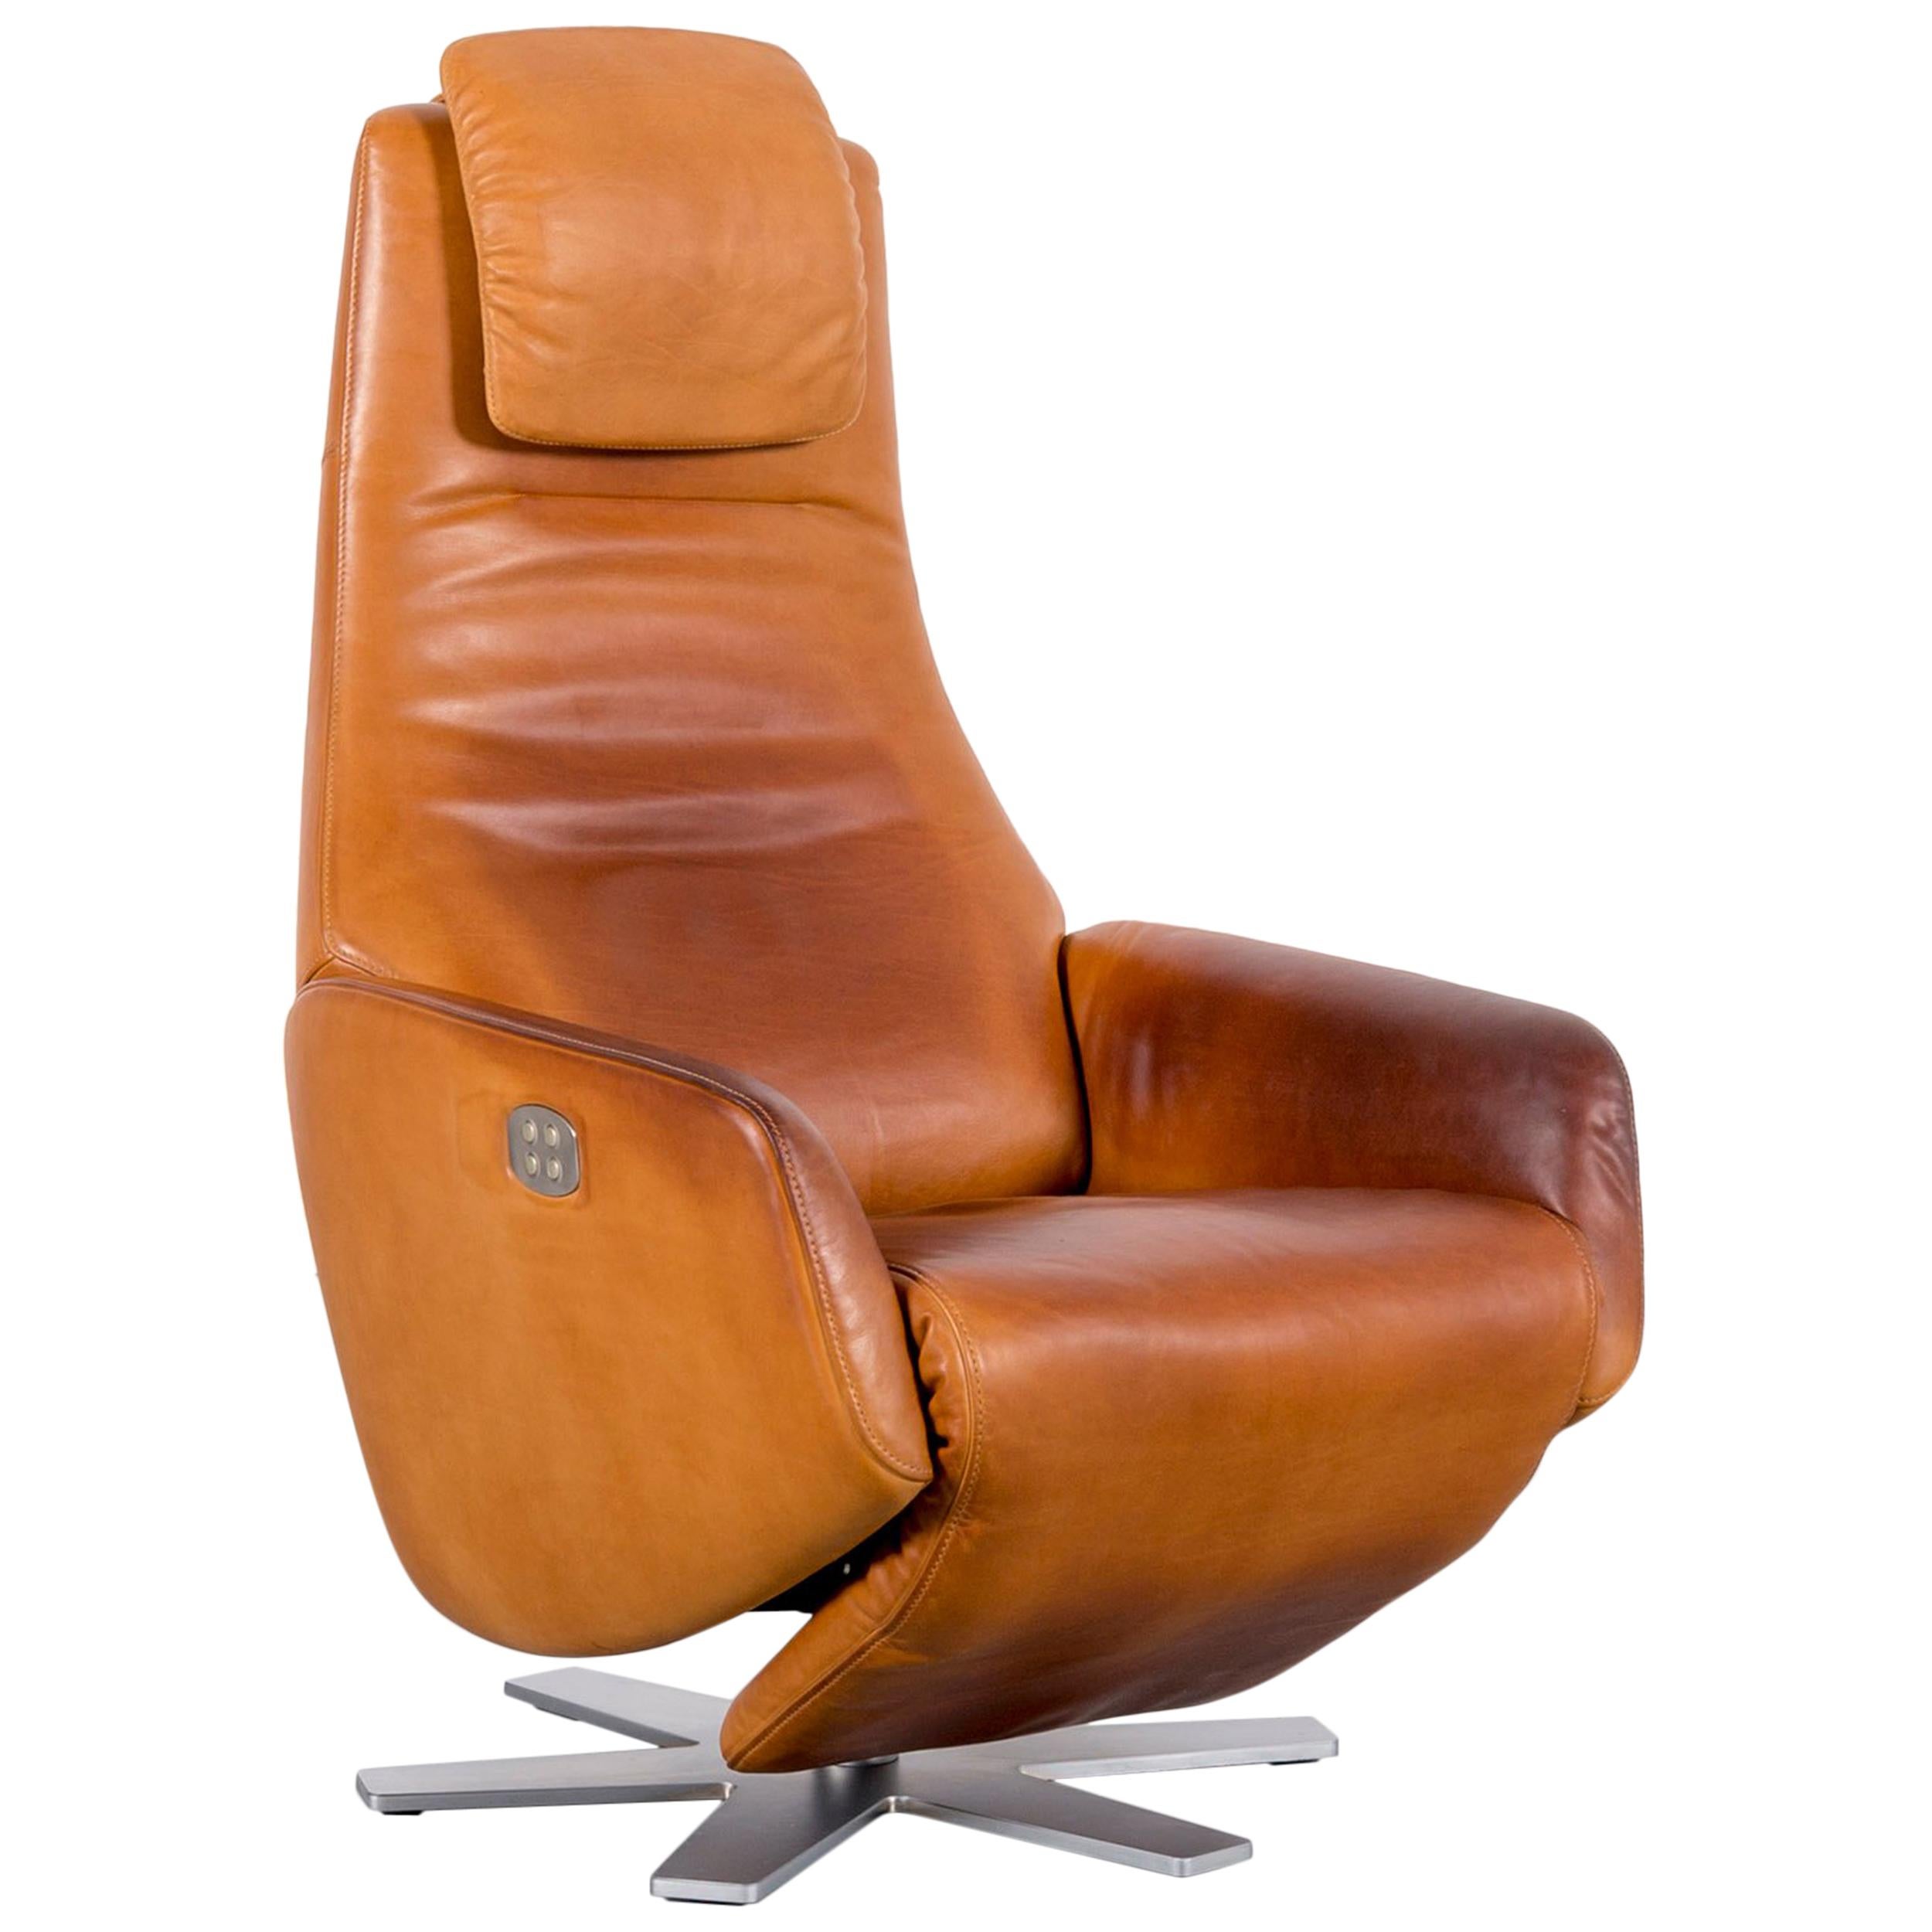 FSM Skye Designer Leather Armchair Brown One-Seat Recliner TV Chair Relax